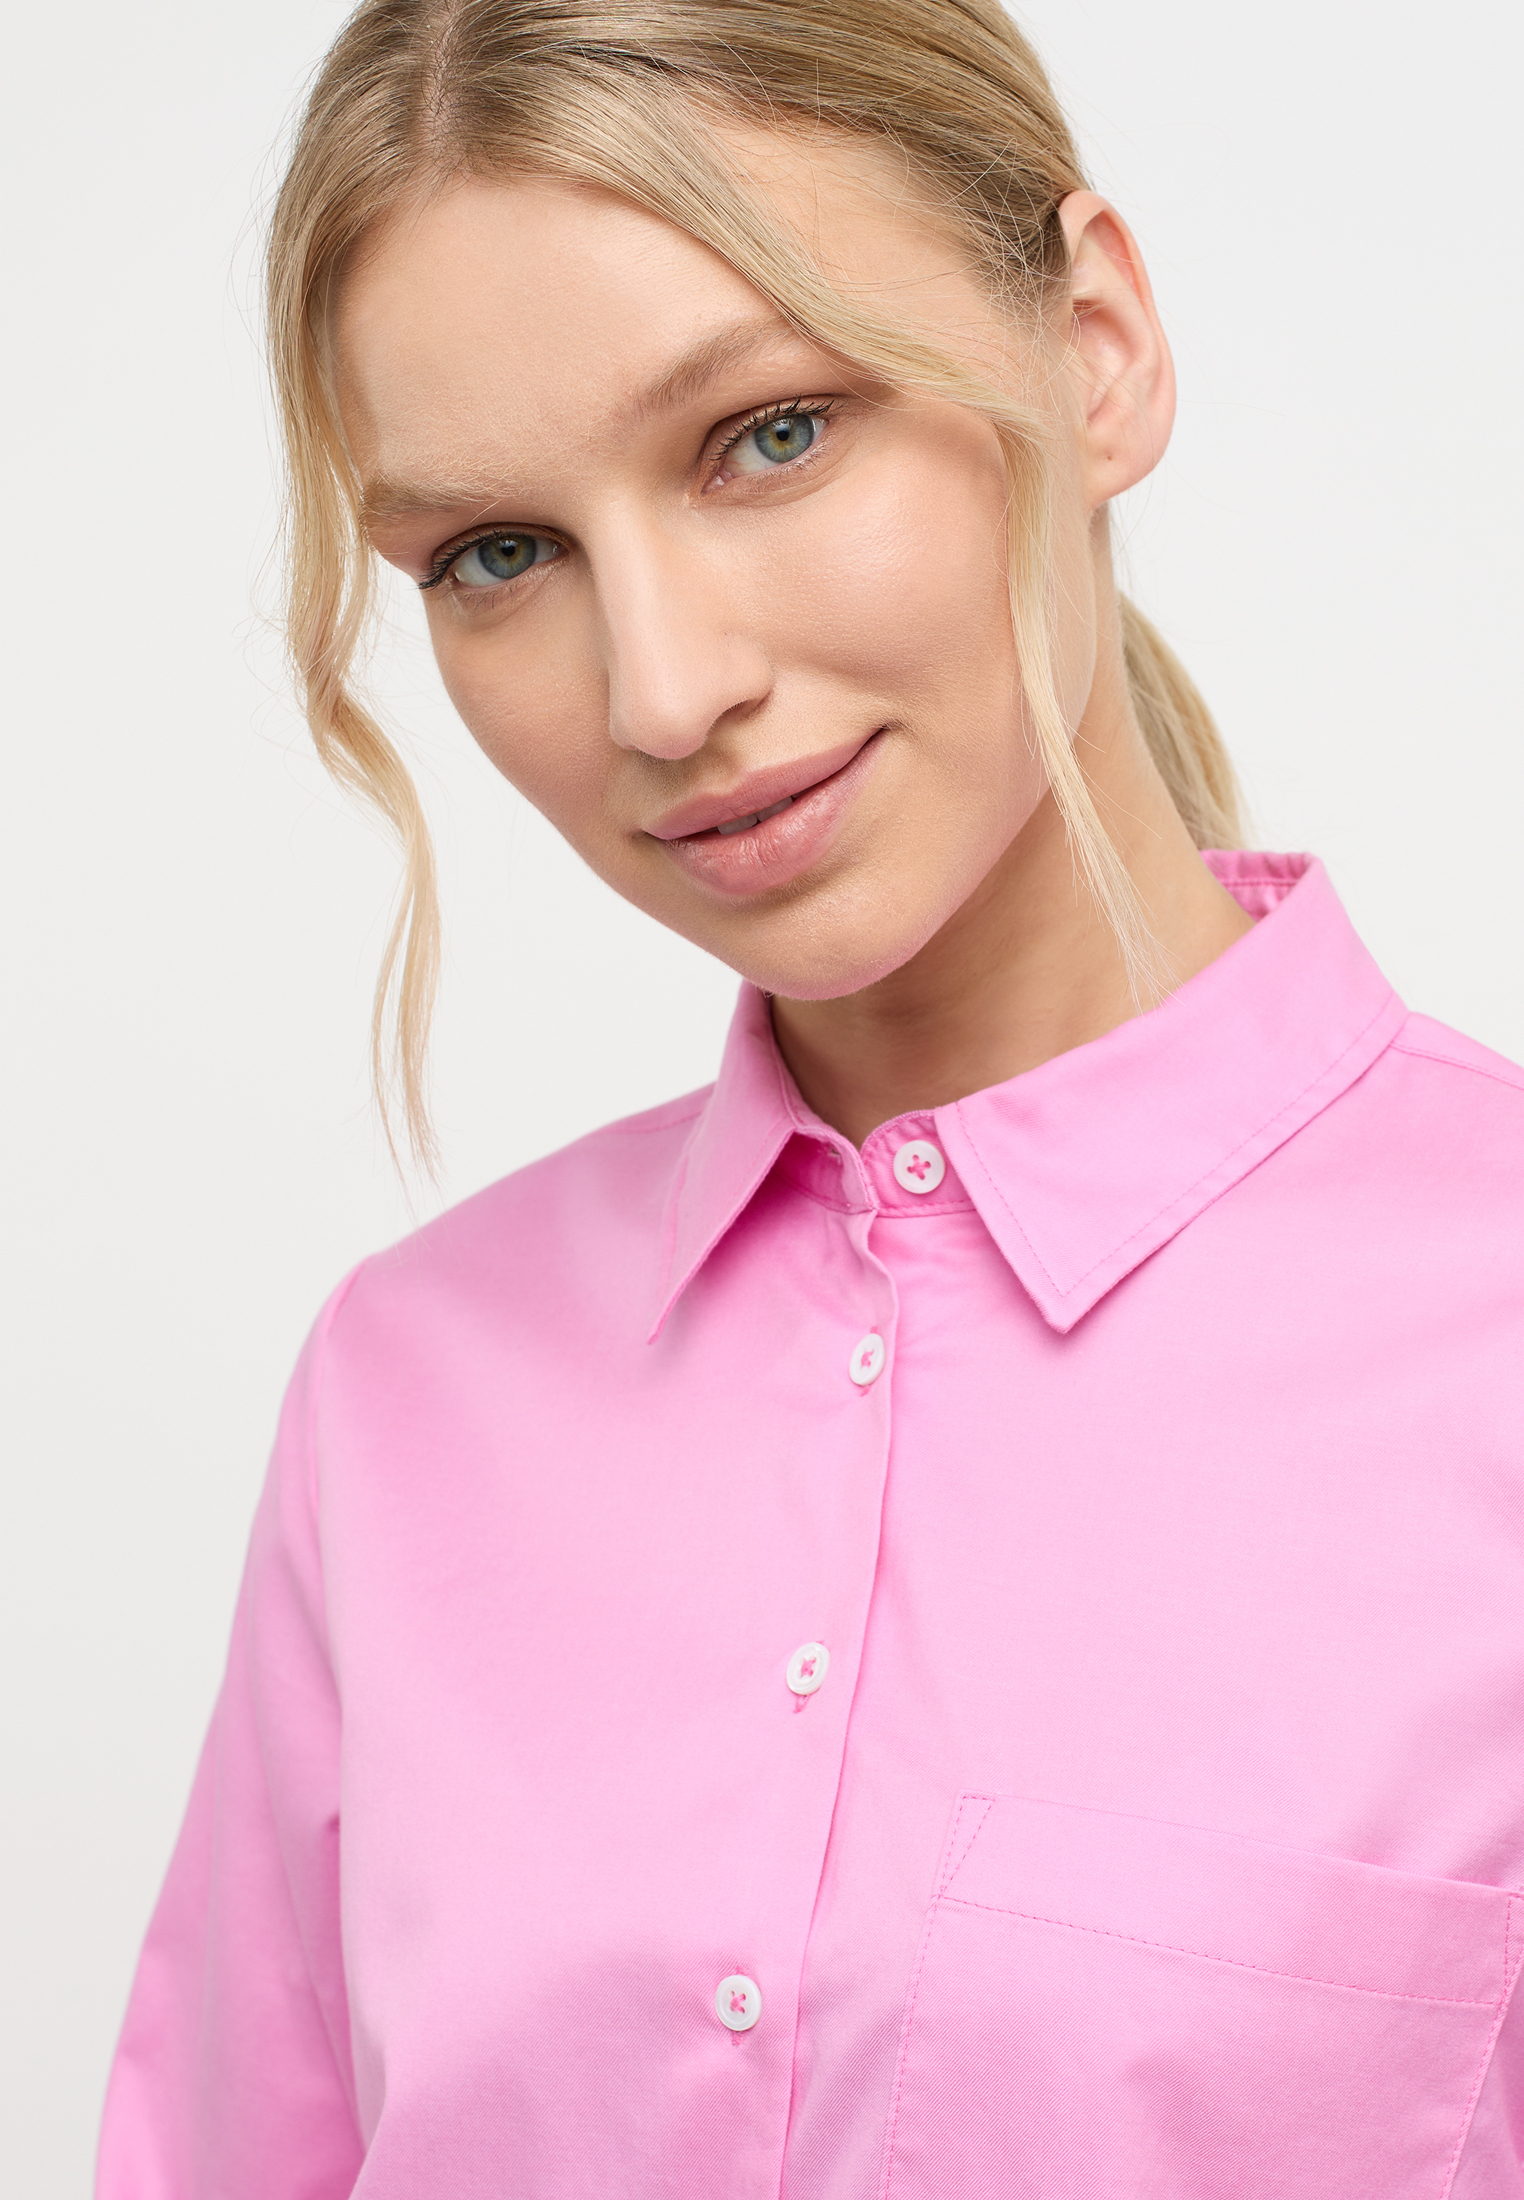 Soft Luxury Shirt Blouse plain pink in | | | | sleeve 44 long pink 2BL03851-15-21-44-1/1